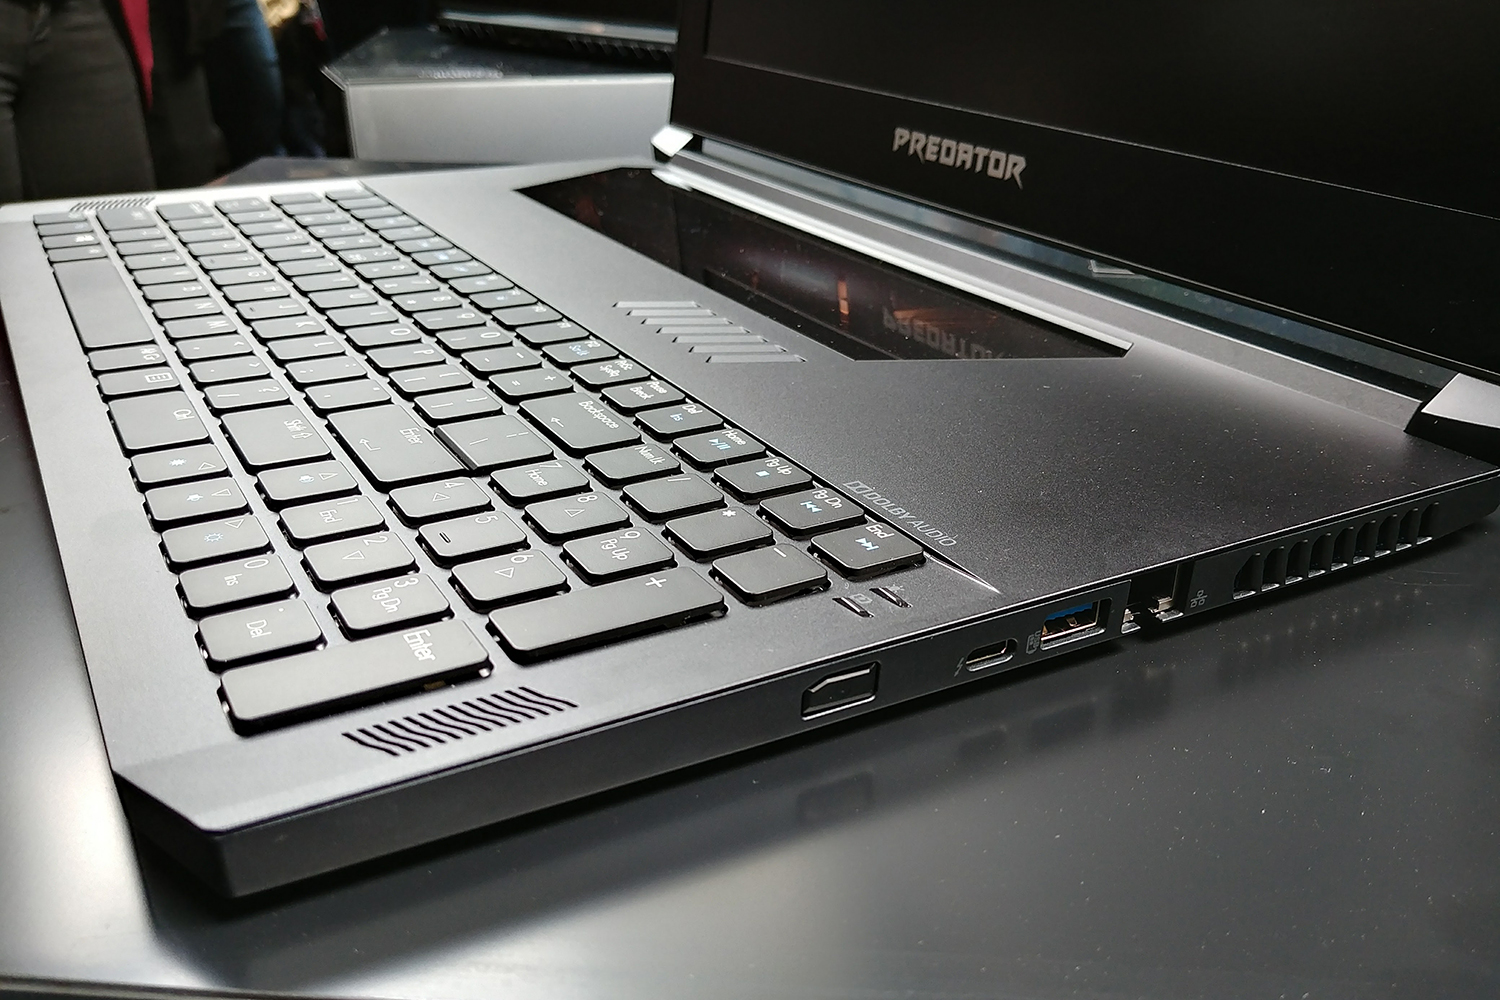 acer triton 700 hands on review 20170427 122130 hdr